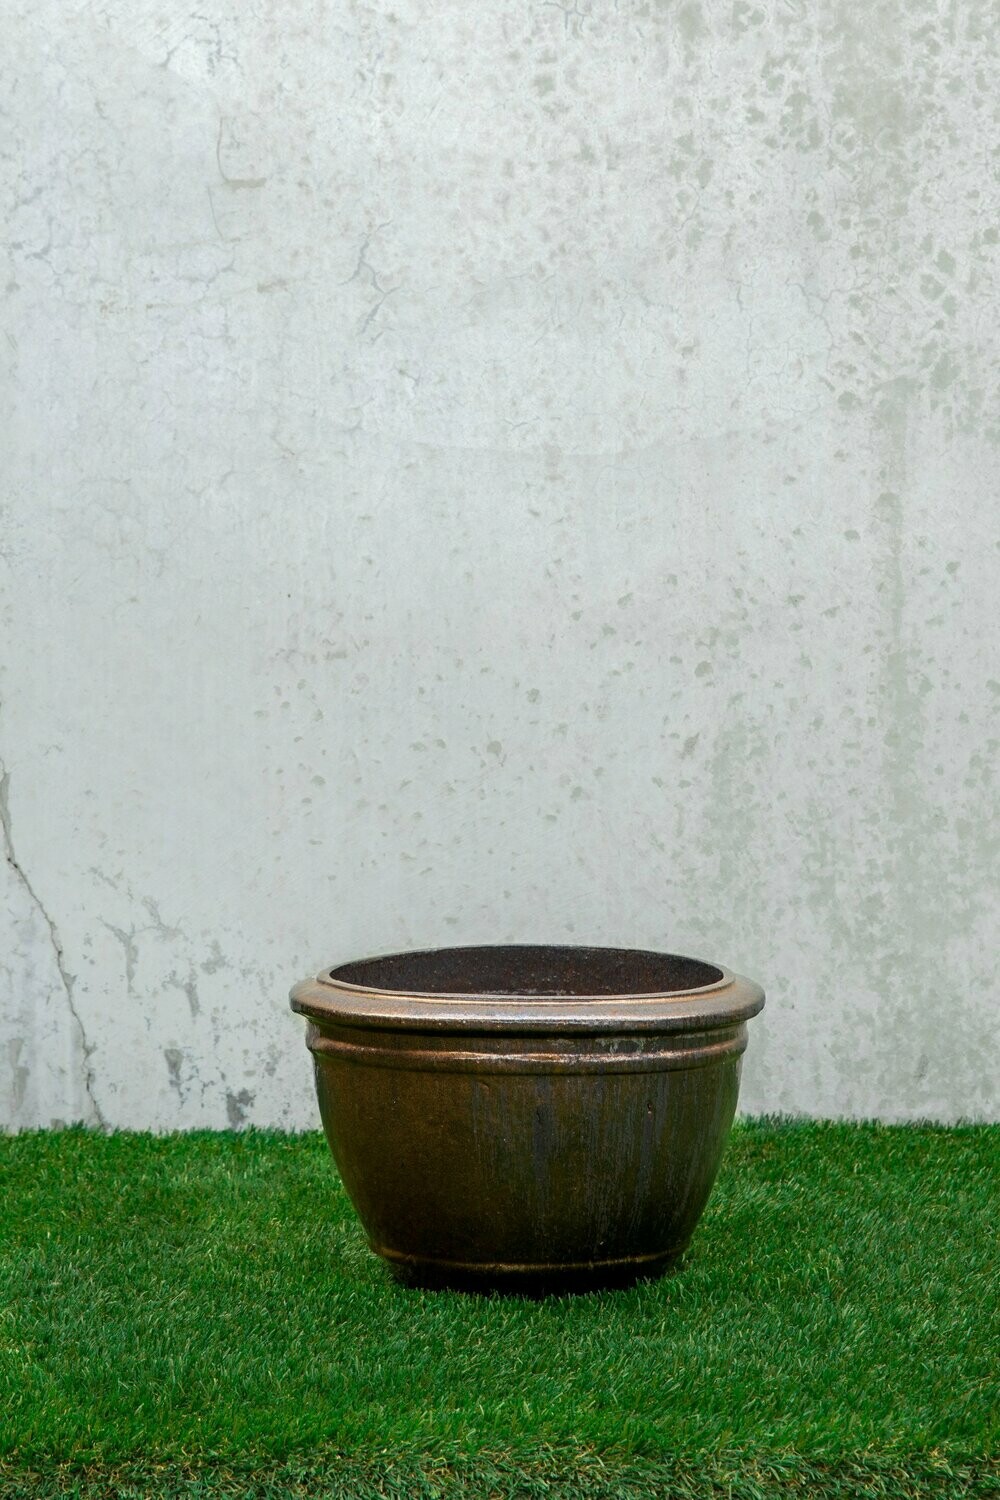 LARGE POT WITH RING
(55cm X 35cm)